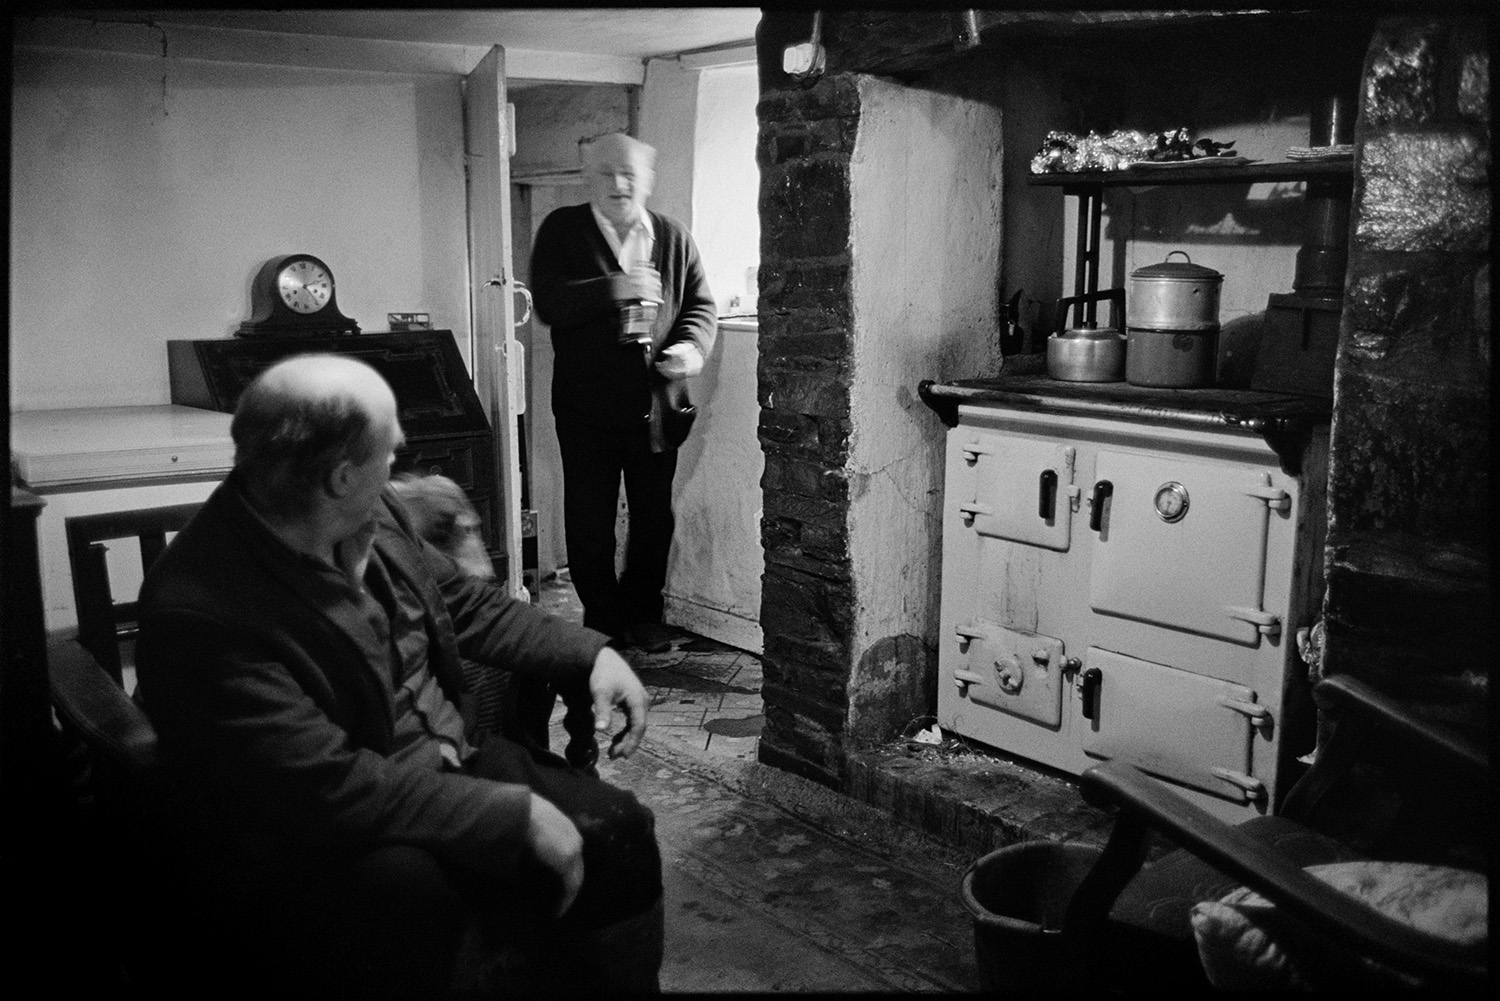 Waiting for Christmas dinner. Woman cooking turkey. Rayburn stove, carving turkey, eating. 
[Archie Parkhouse and another man in the kitchen by a Rayburn stove at Horseshoe Cottage on Christmas Day, before their Christmas dinner.]